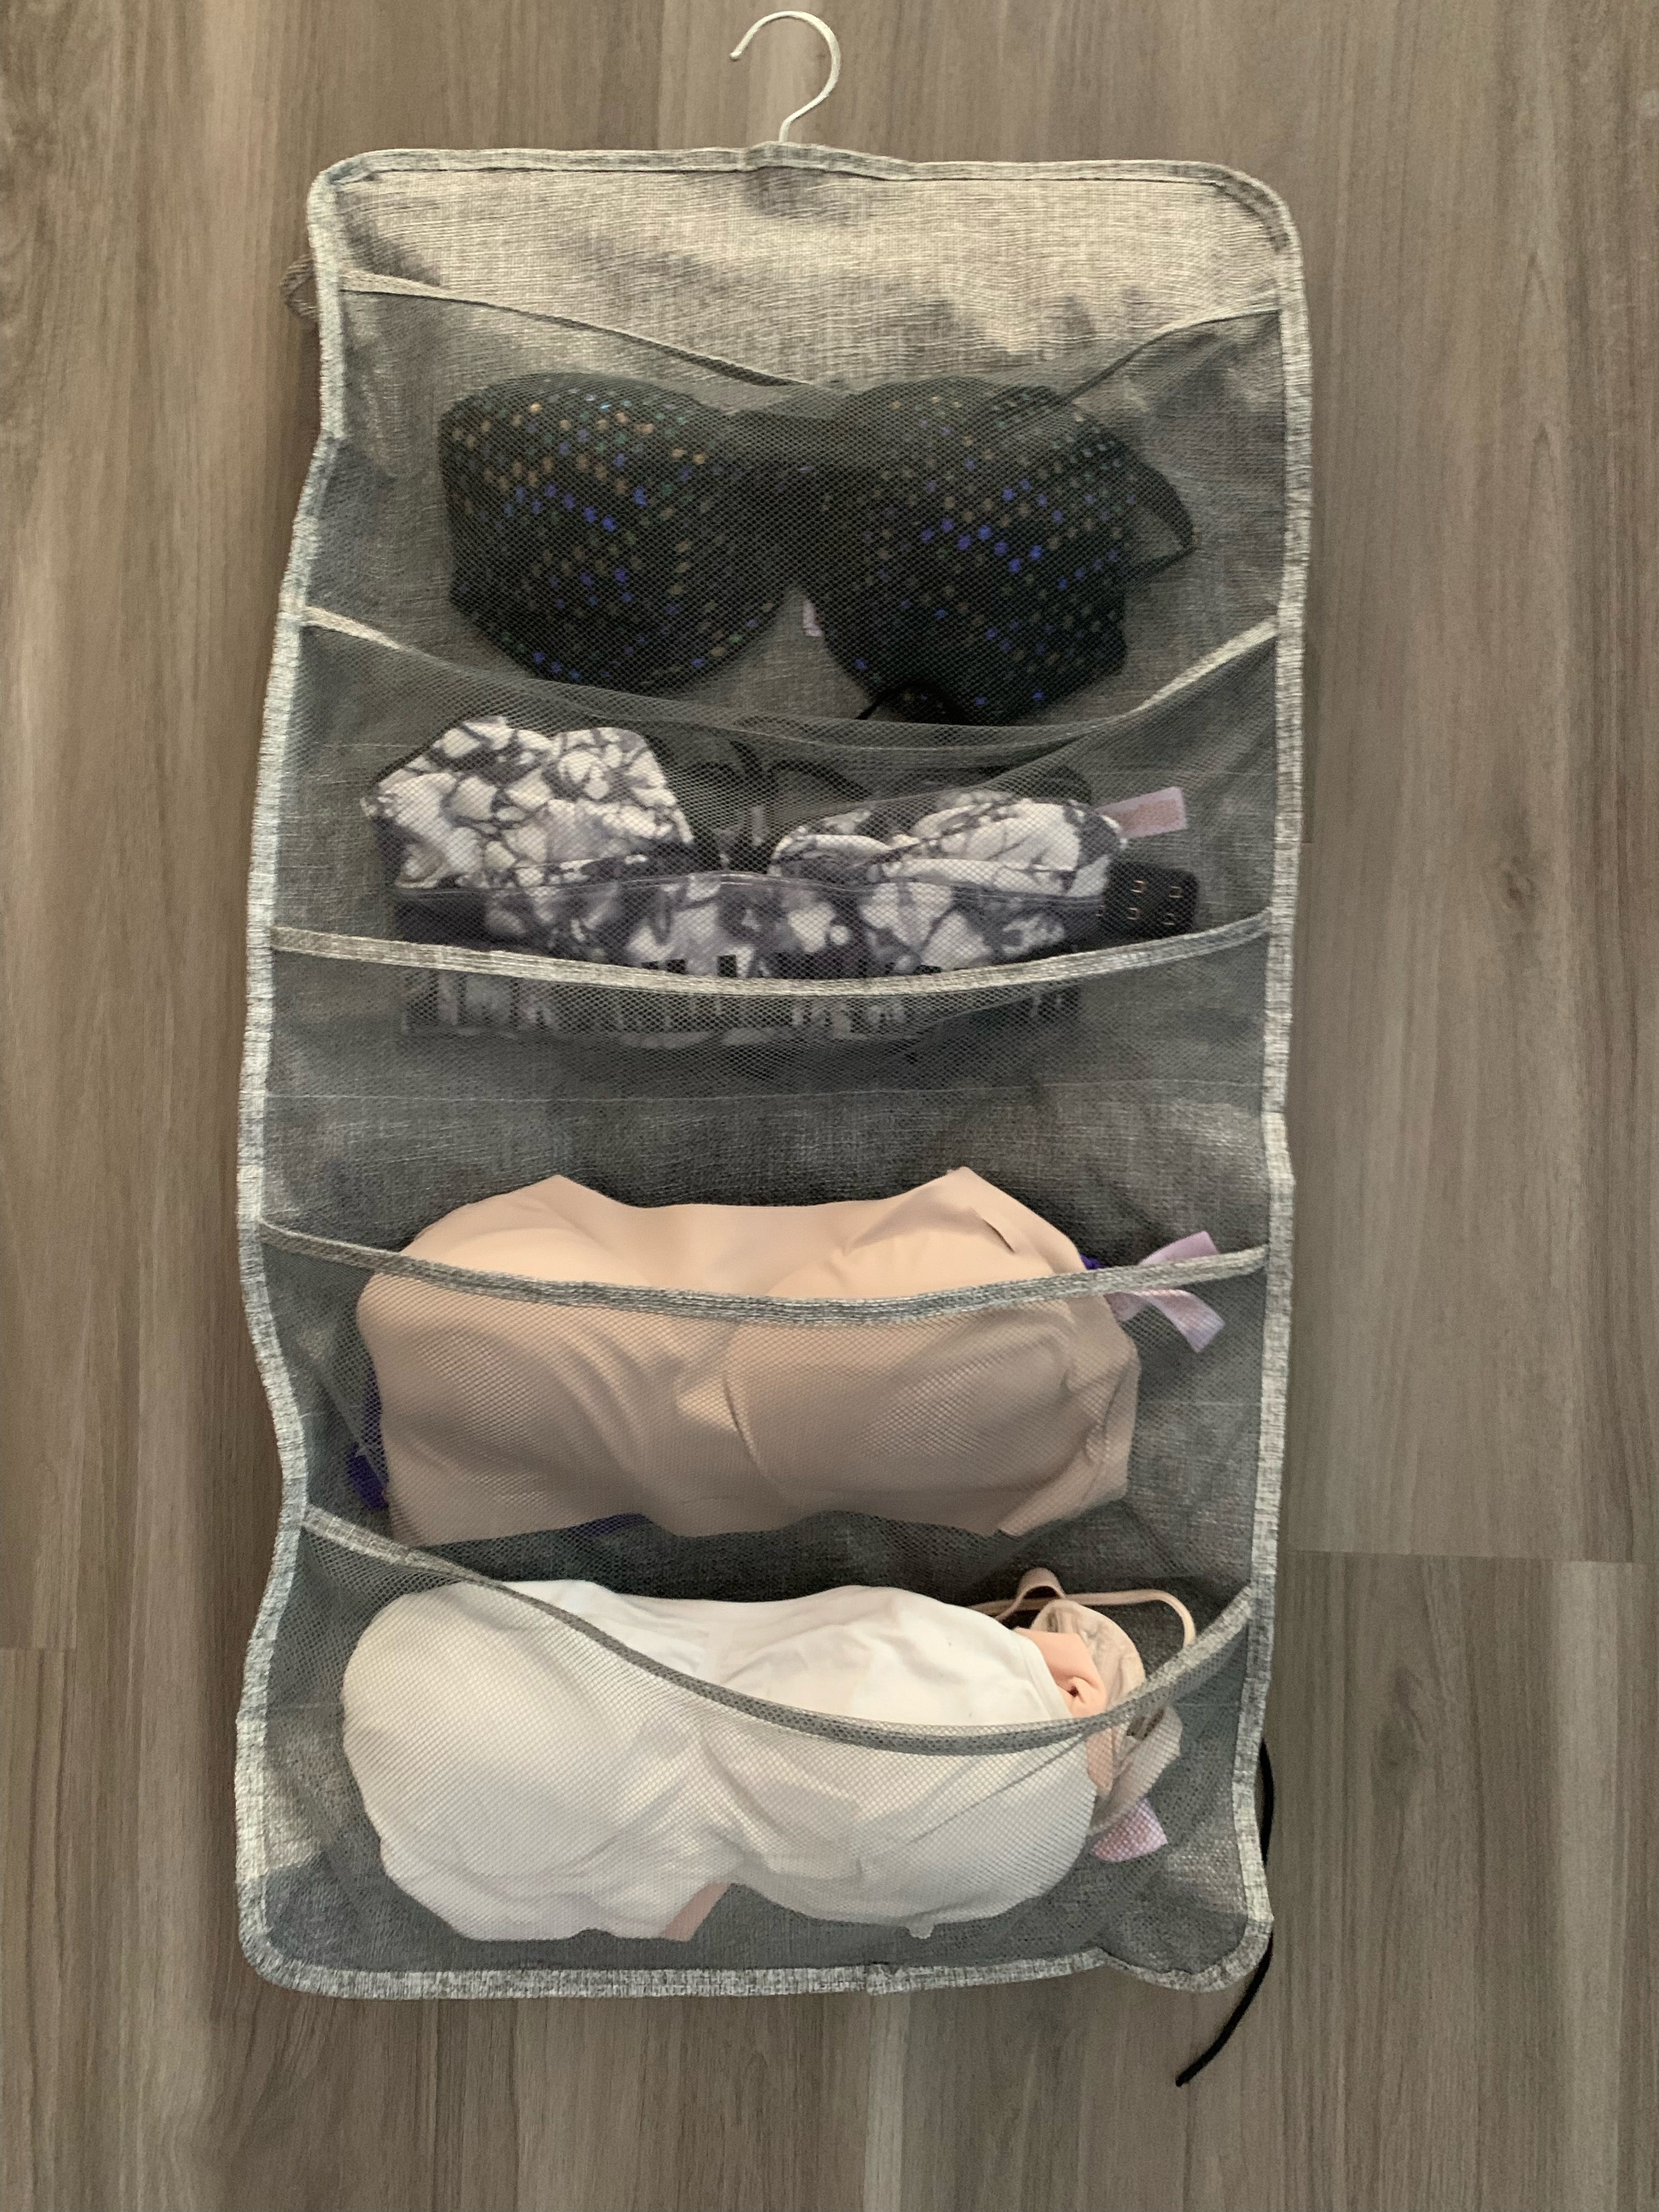 A hanging closet organizer filled with bras